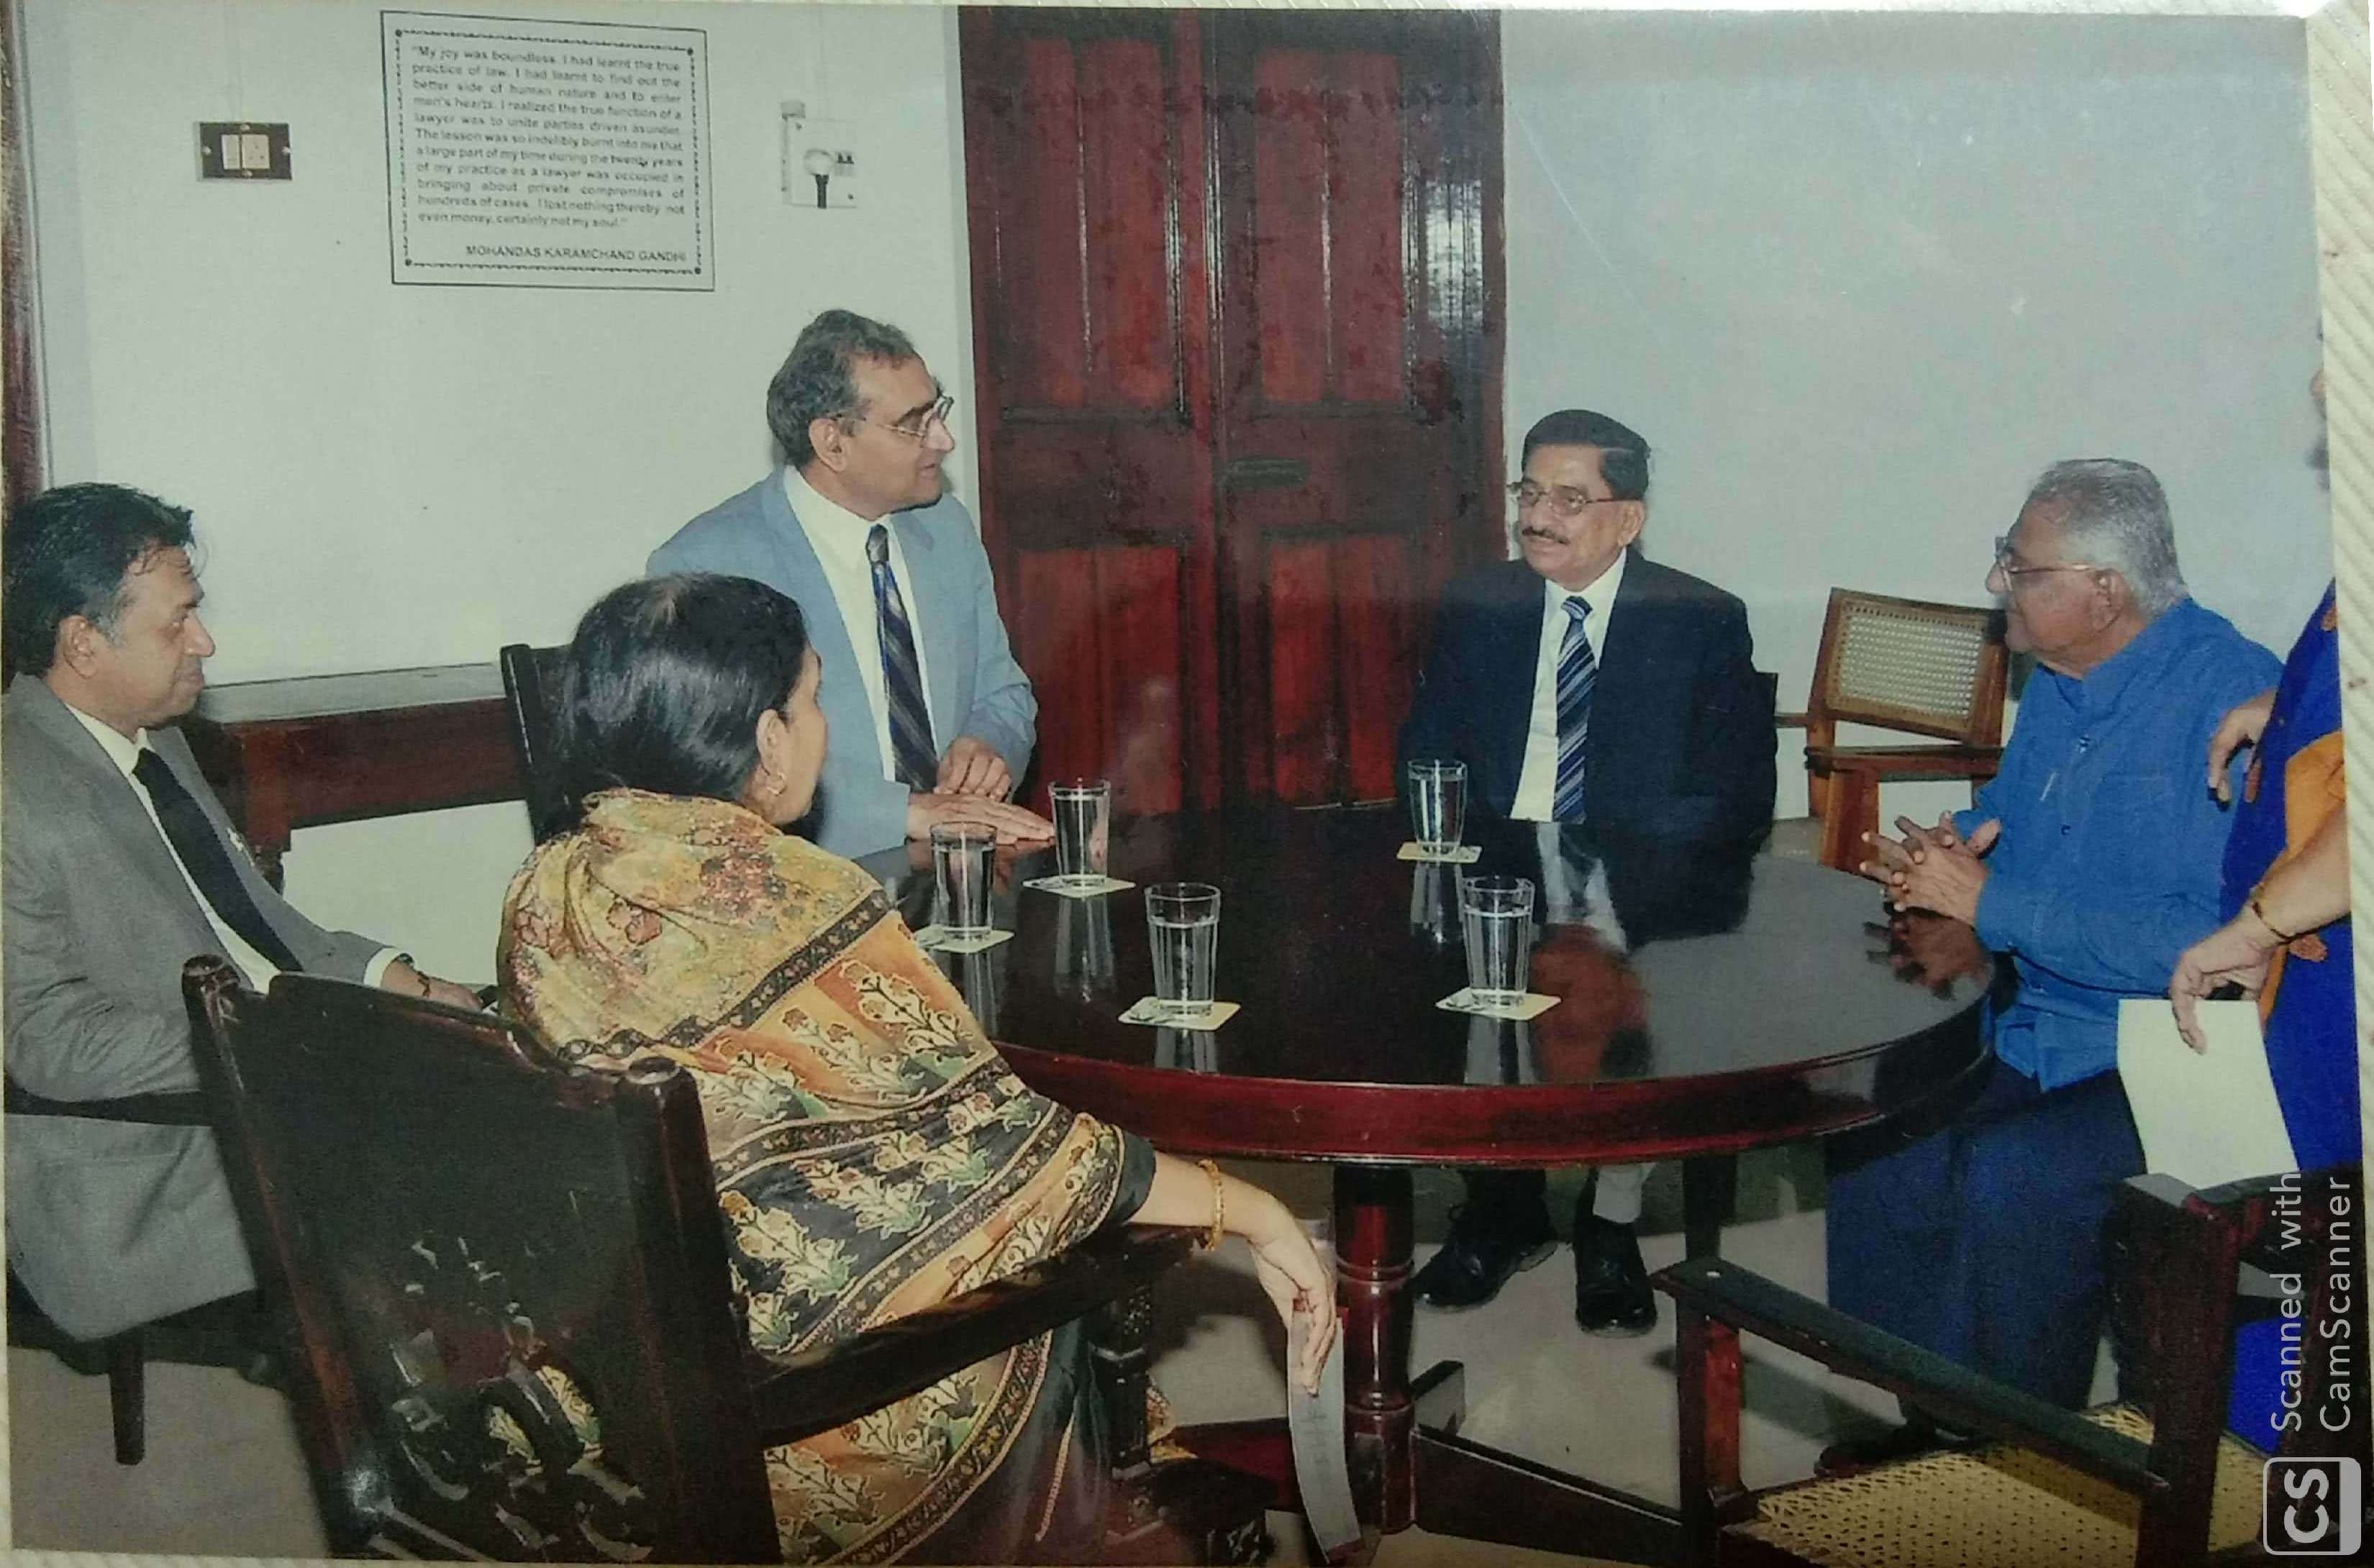 Visit of Hon’ble Mr.Justice Markandey Katju, the then Chief Justice of the High Court of Madras to the Centre and interacting with the Master Trainer and Mediators.